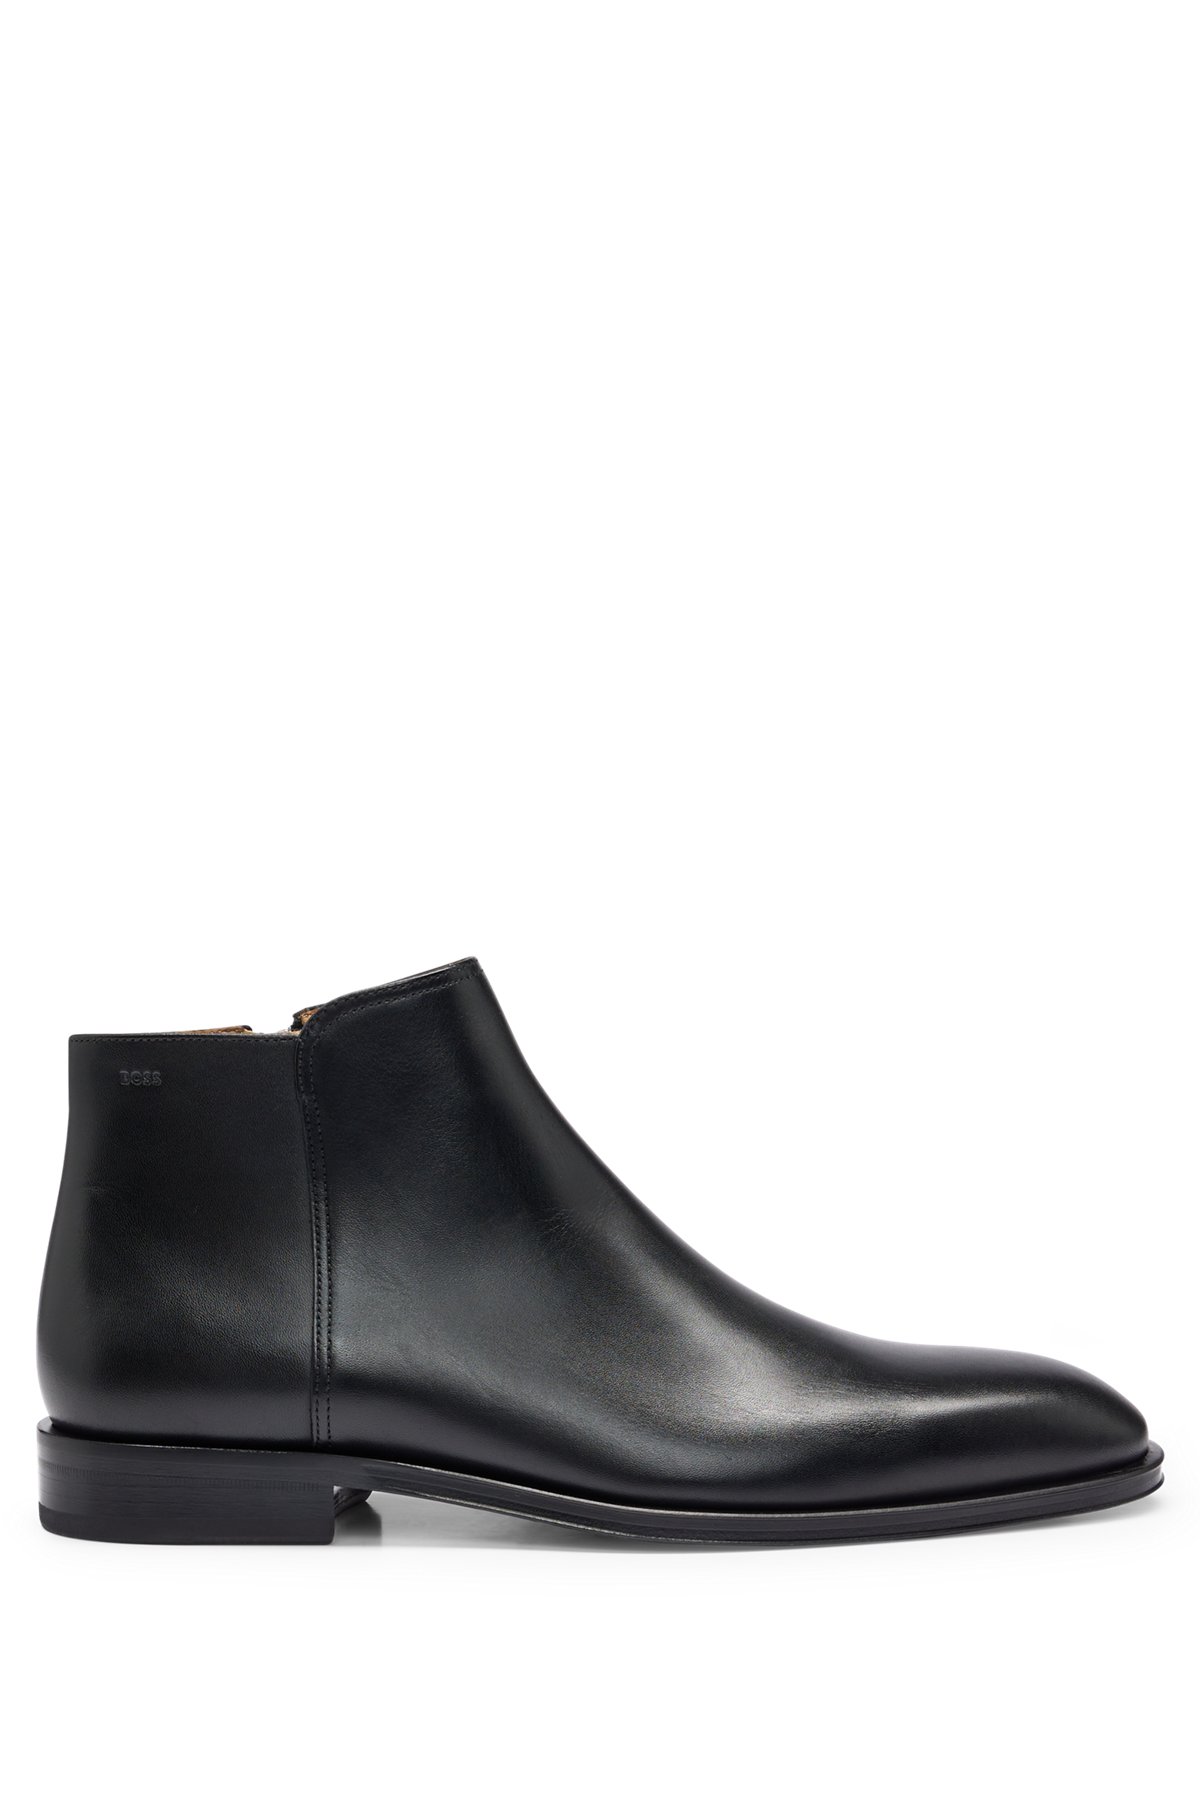 Italian leather ankle boots with embossed logo, Black